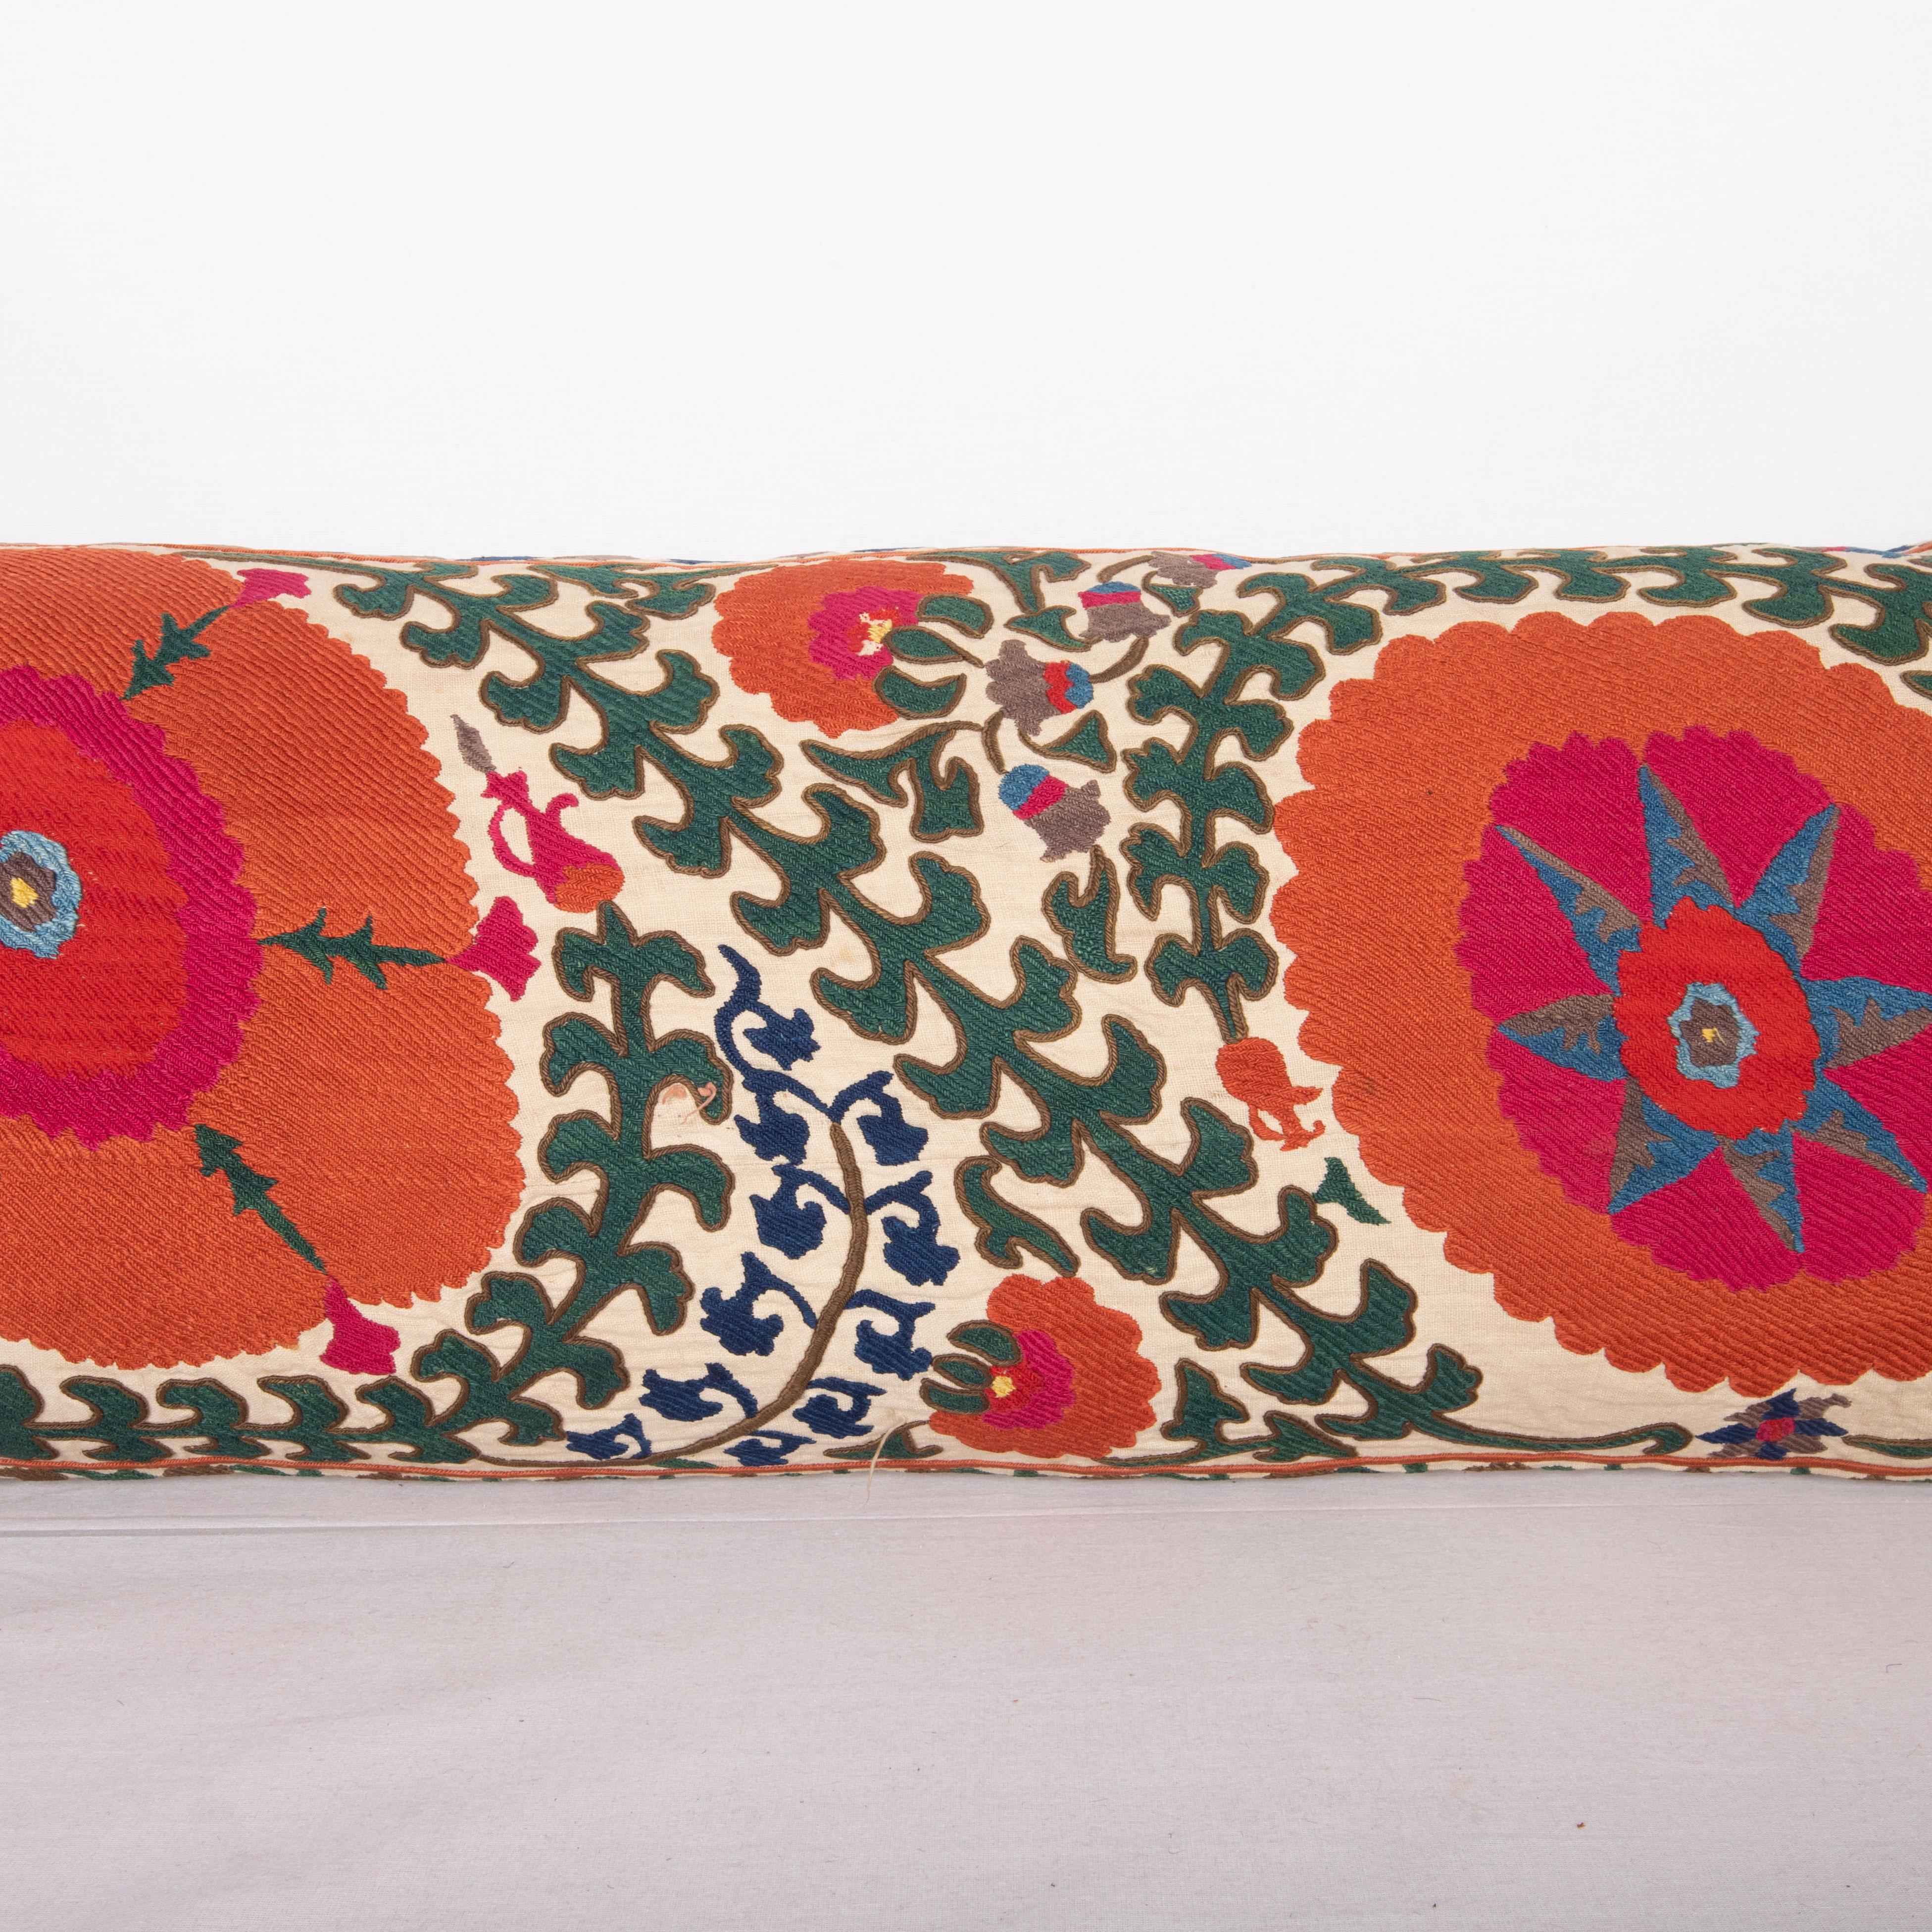 Embroidered Antique Suzani Pillow Case Made from a Mid-1860s Bukhara Suzani